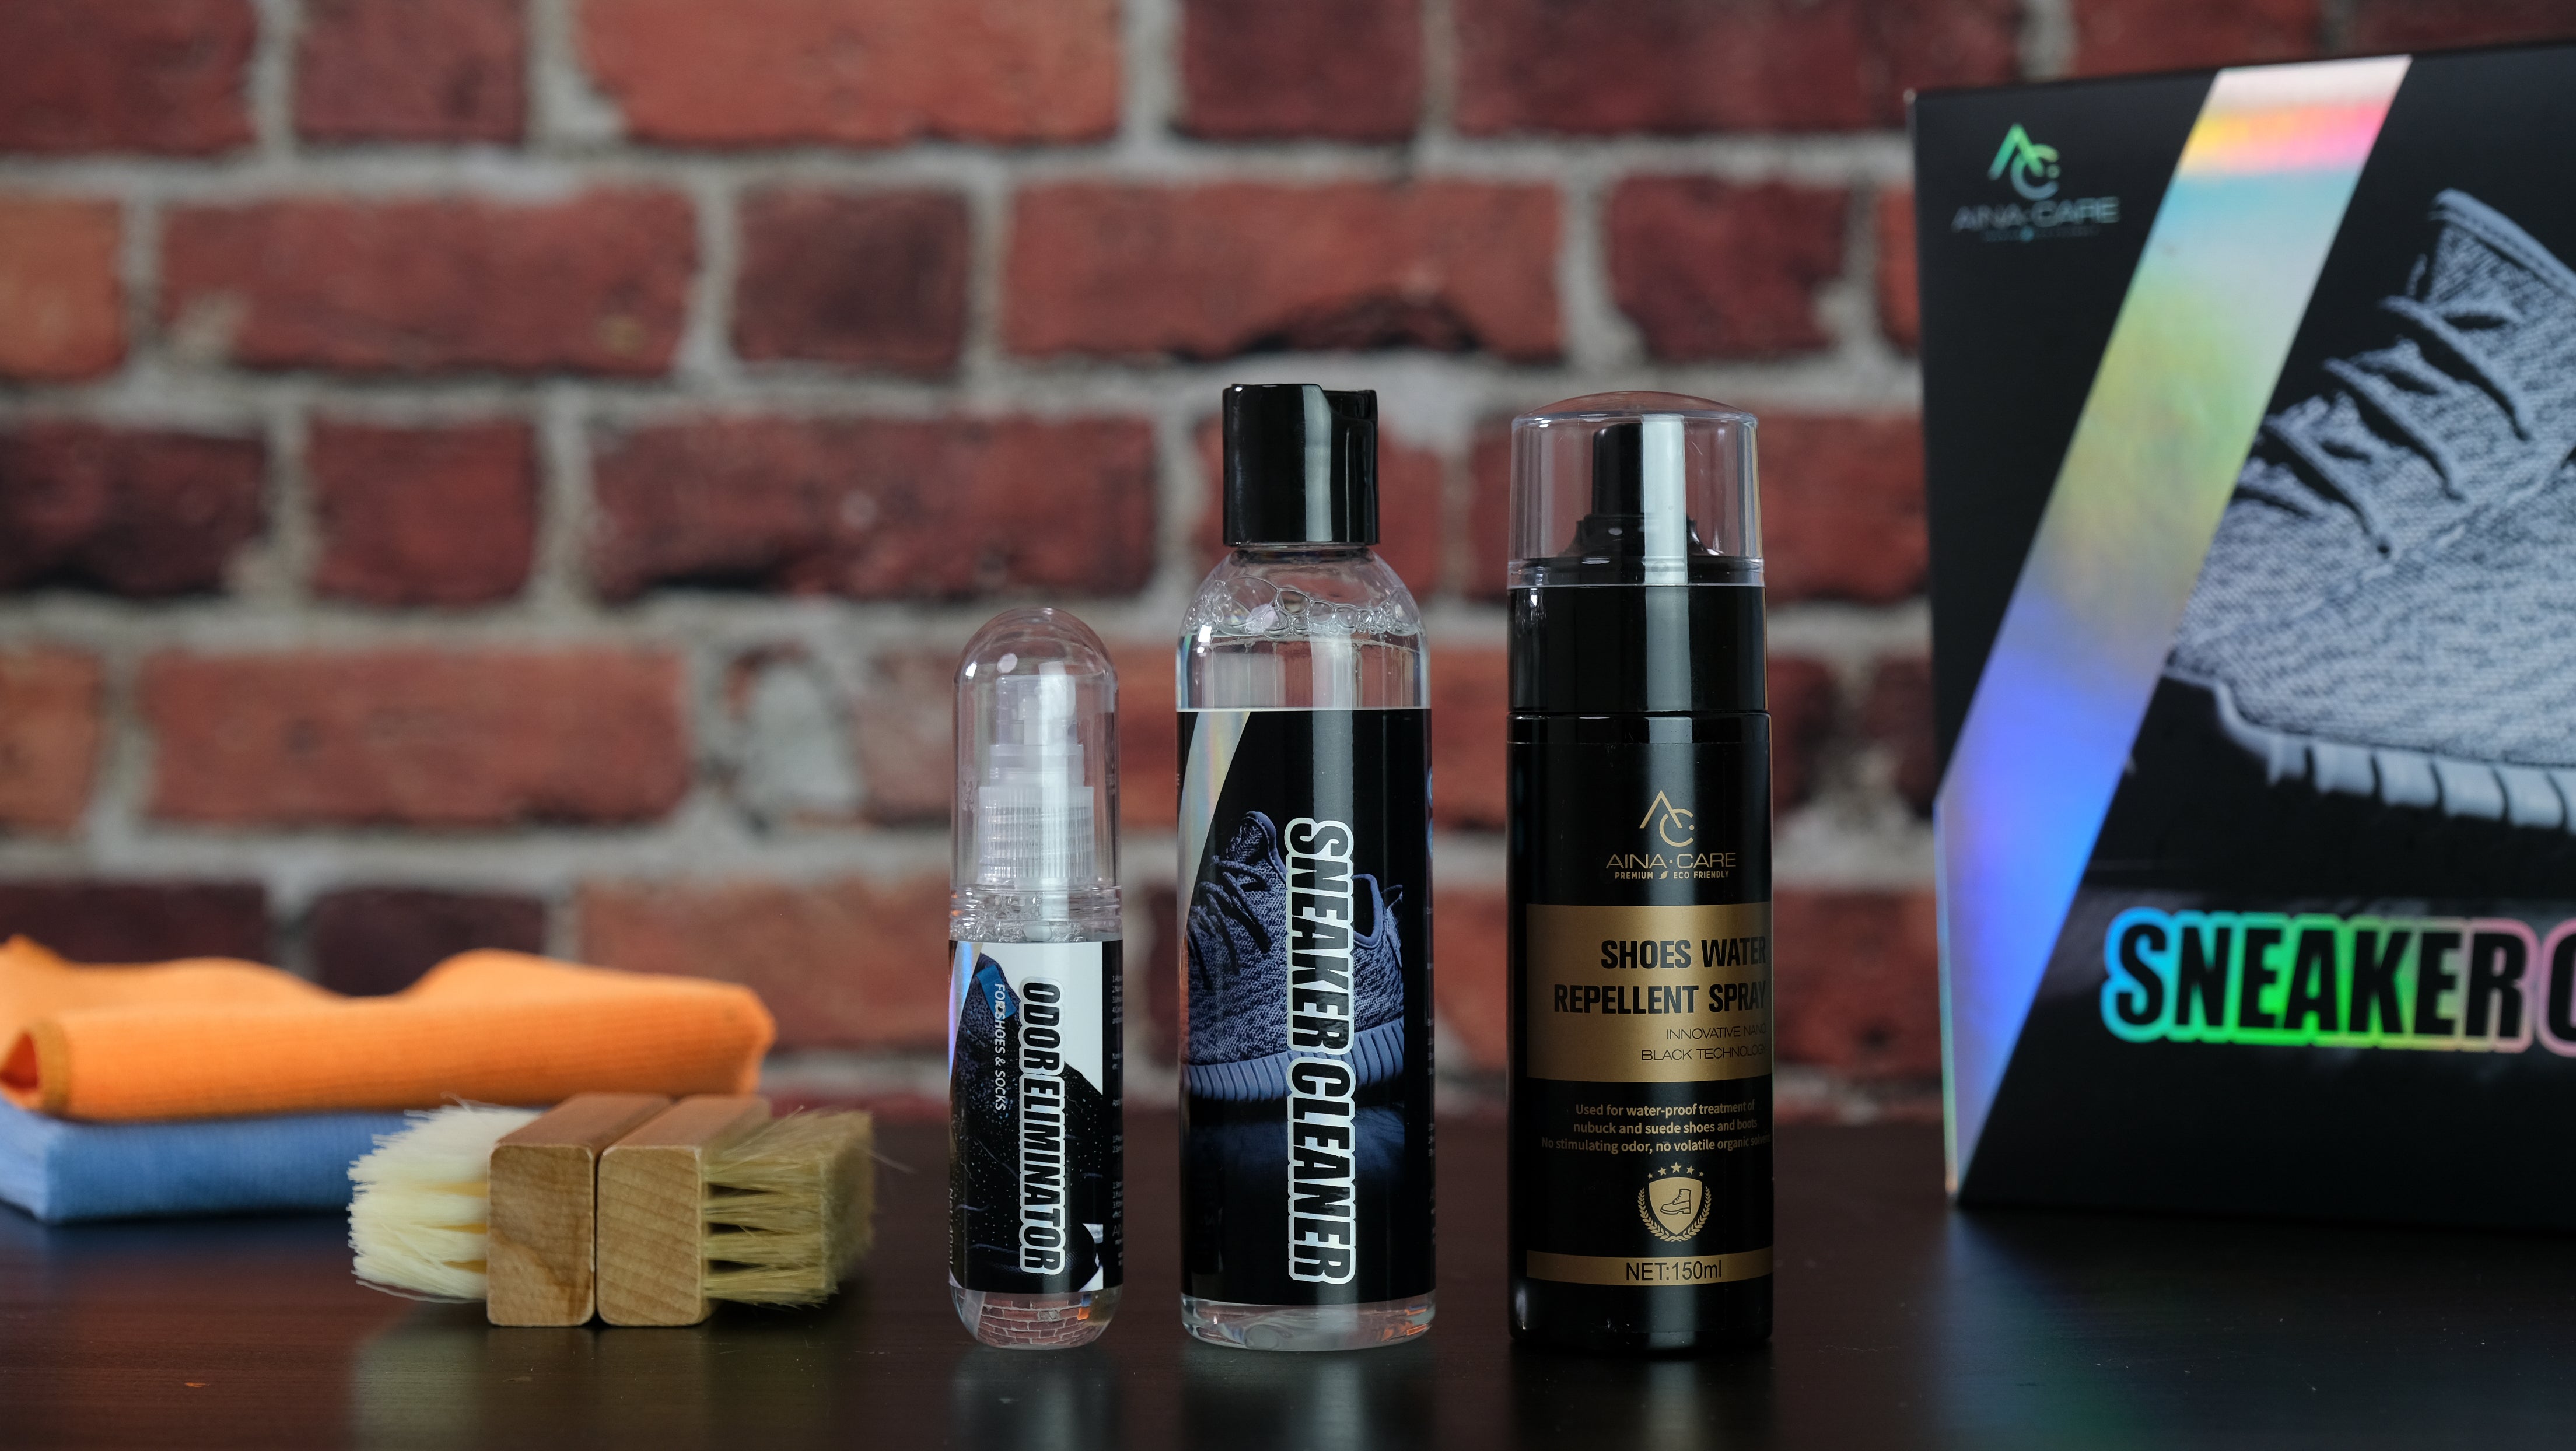 Each of the items from the Signature Premium Sneakers Kit displayed on a black table in front of a brick wall. Items from left to right are: two microfiber cloths, two brushes, an odor eliminator spray, a bottle of sneaker cleaner, a bottle of water repellent spray, the package box..